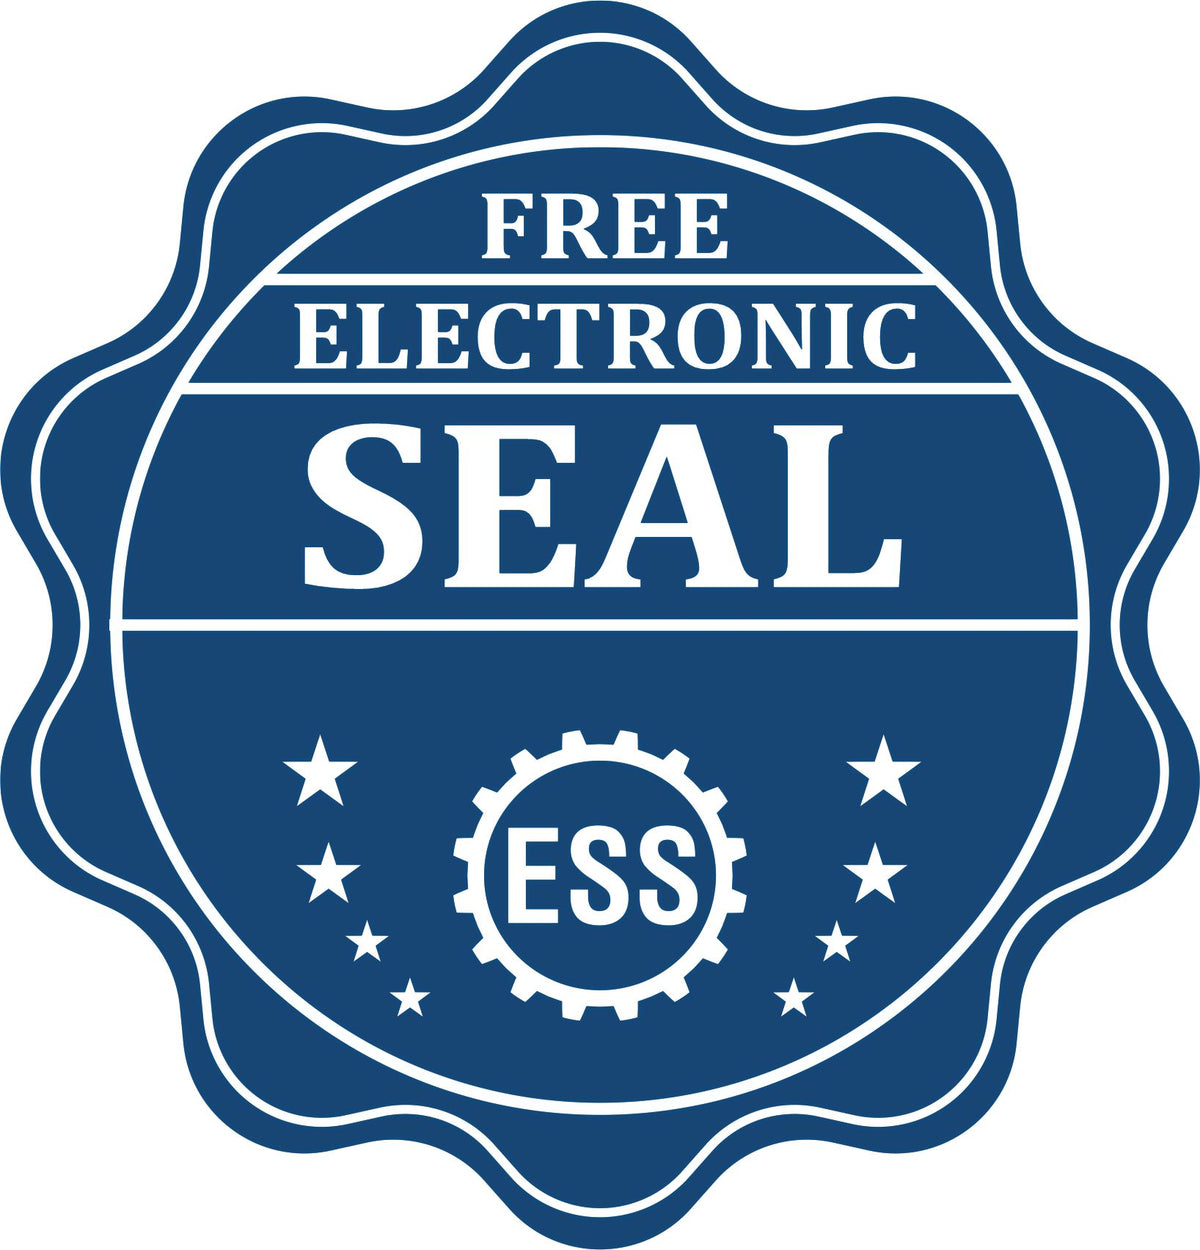 A badge showing a free electronic seal for the Hybrid Utah Geologist Seal with stars and the ESS gear on the emblem.